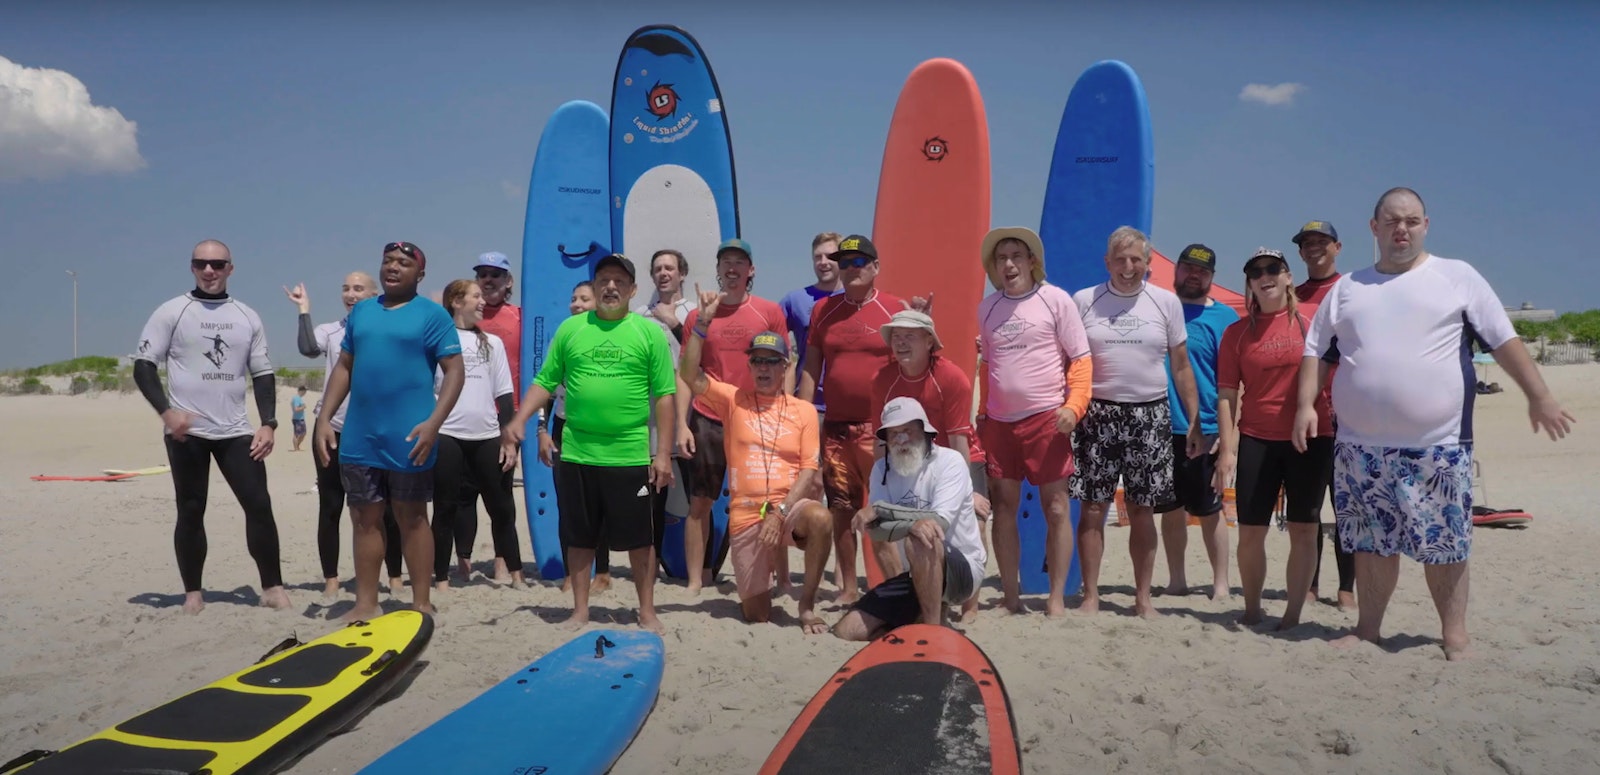 screenshot from a video depicting a group of people in surf gear posing for a photo